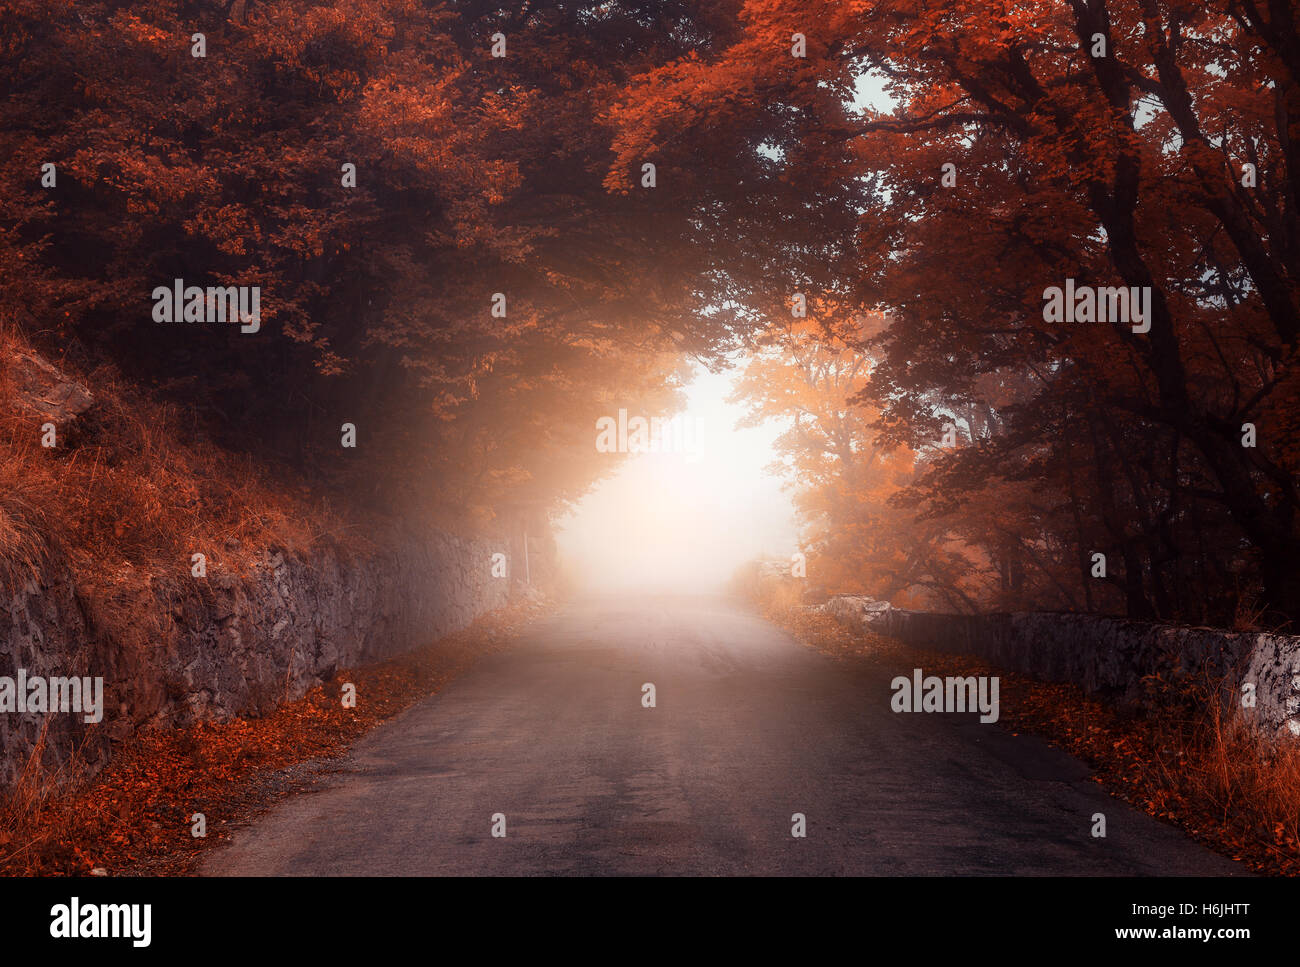 Mystical autumn forest with road in fog. Fall misty woods. Colorful landscape with trees, rural road, orange and red foliage Stock Photo